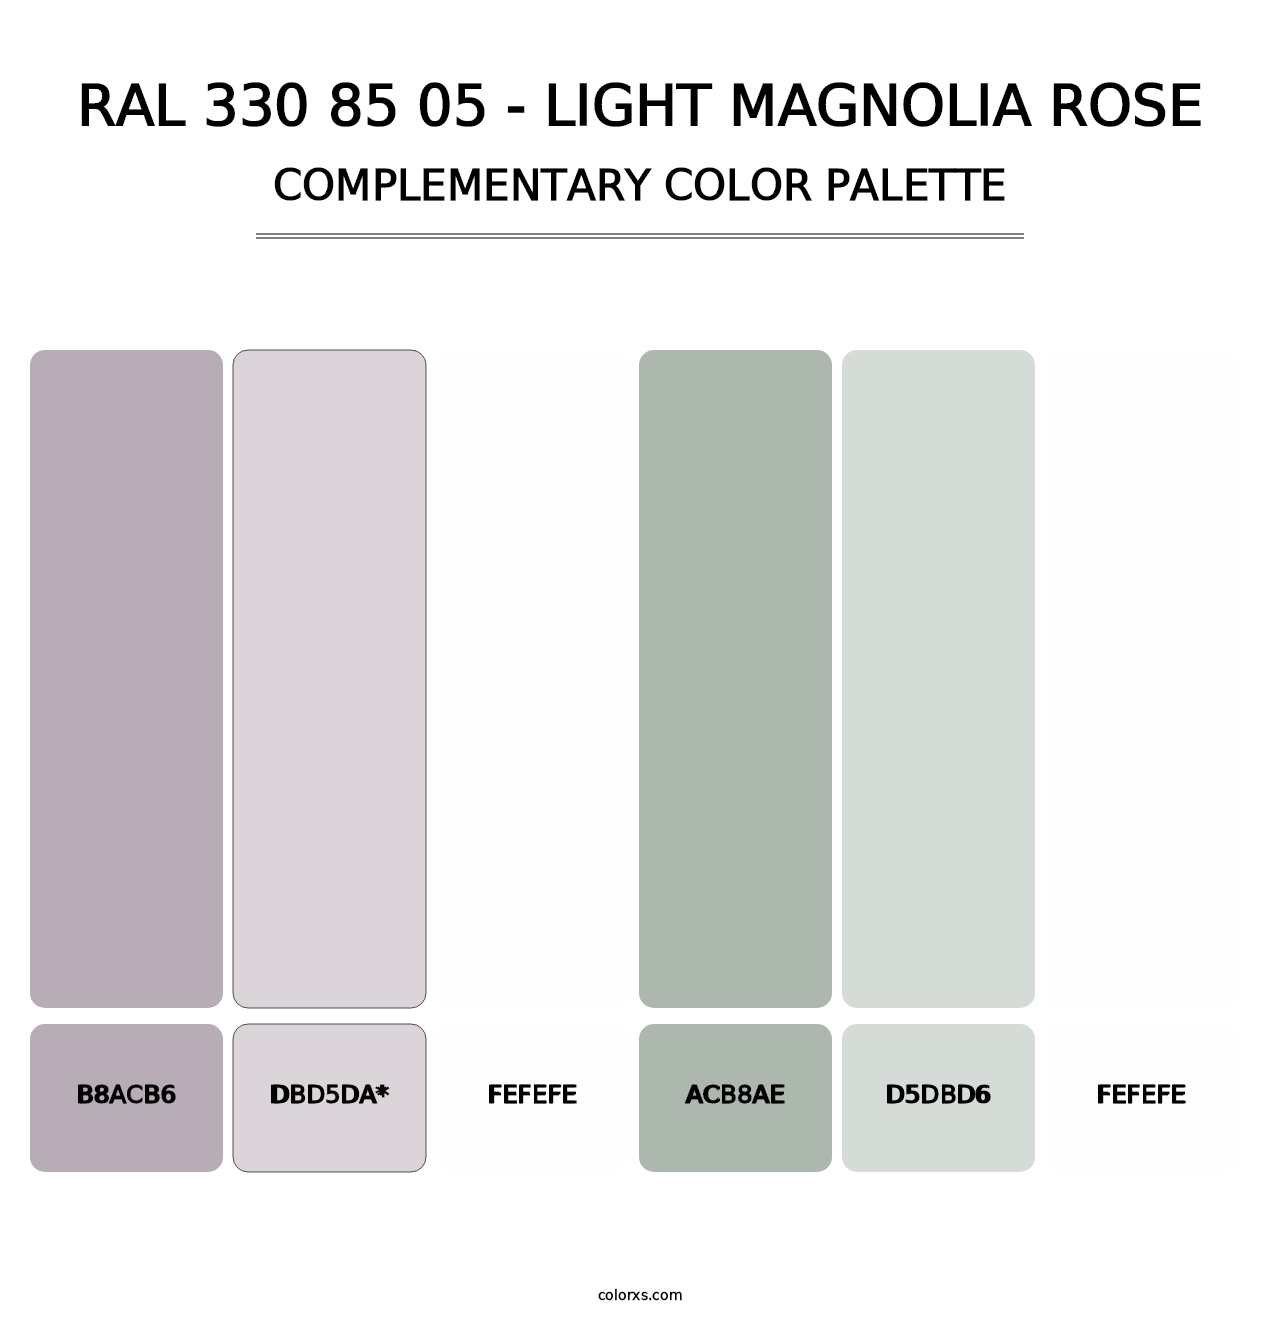 RAL 330 85 05 - Light Magnolia Rose - Complementary Color Palette